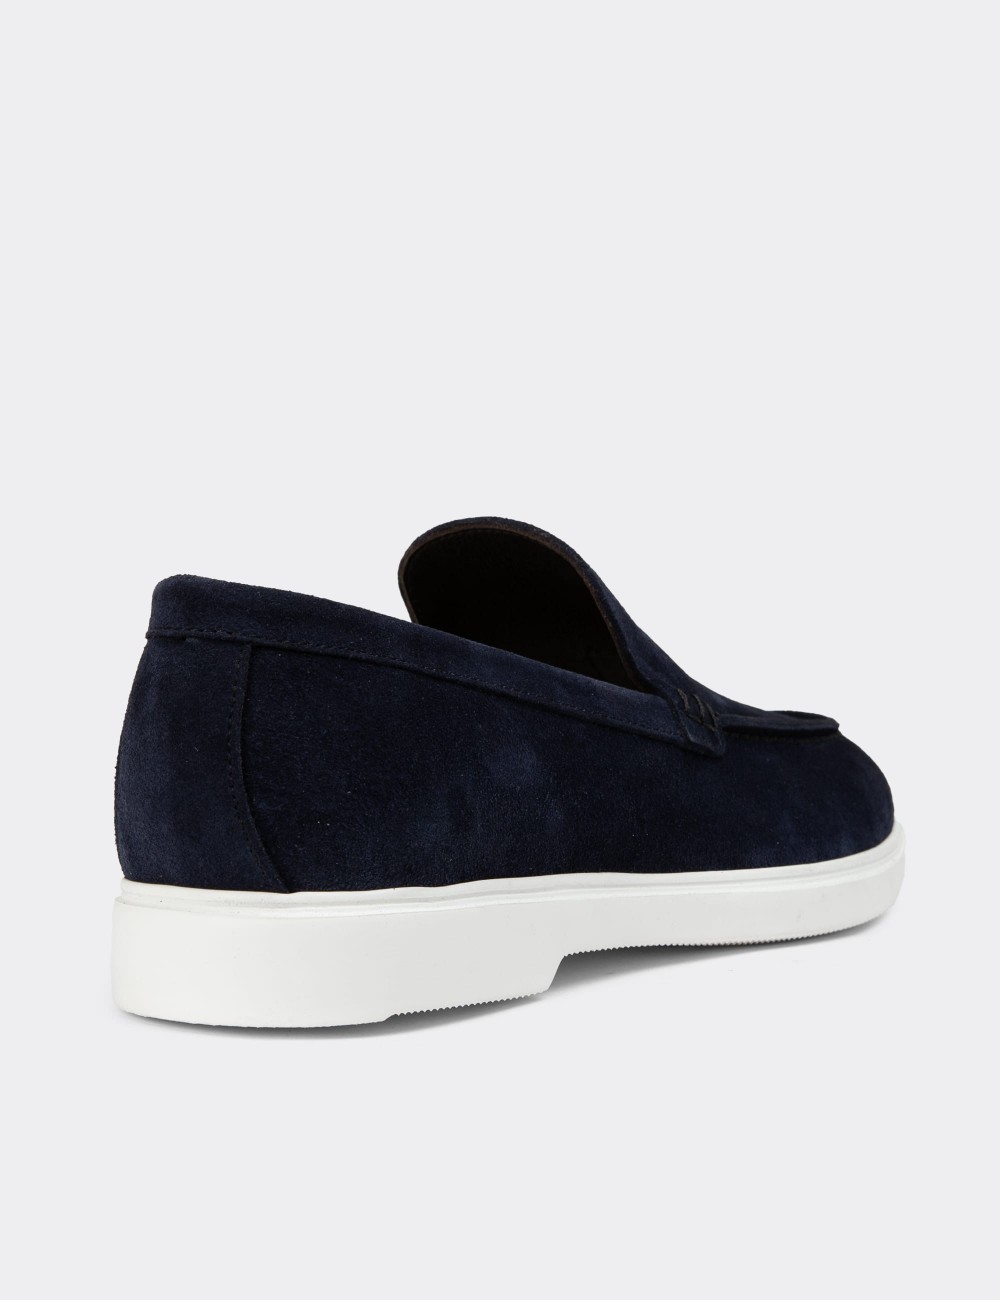 Navy Suede Leather Loafers - 01957MLCVE01